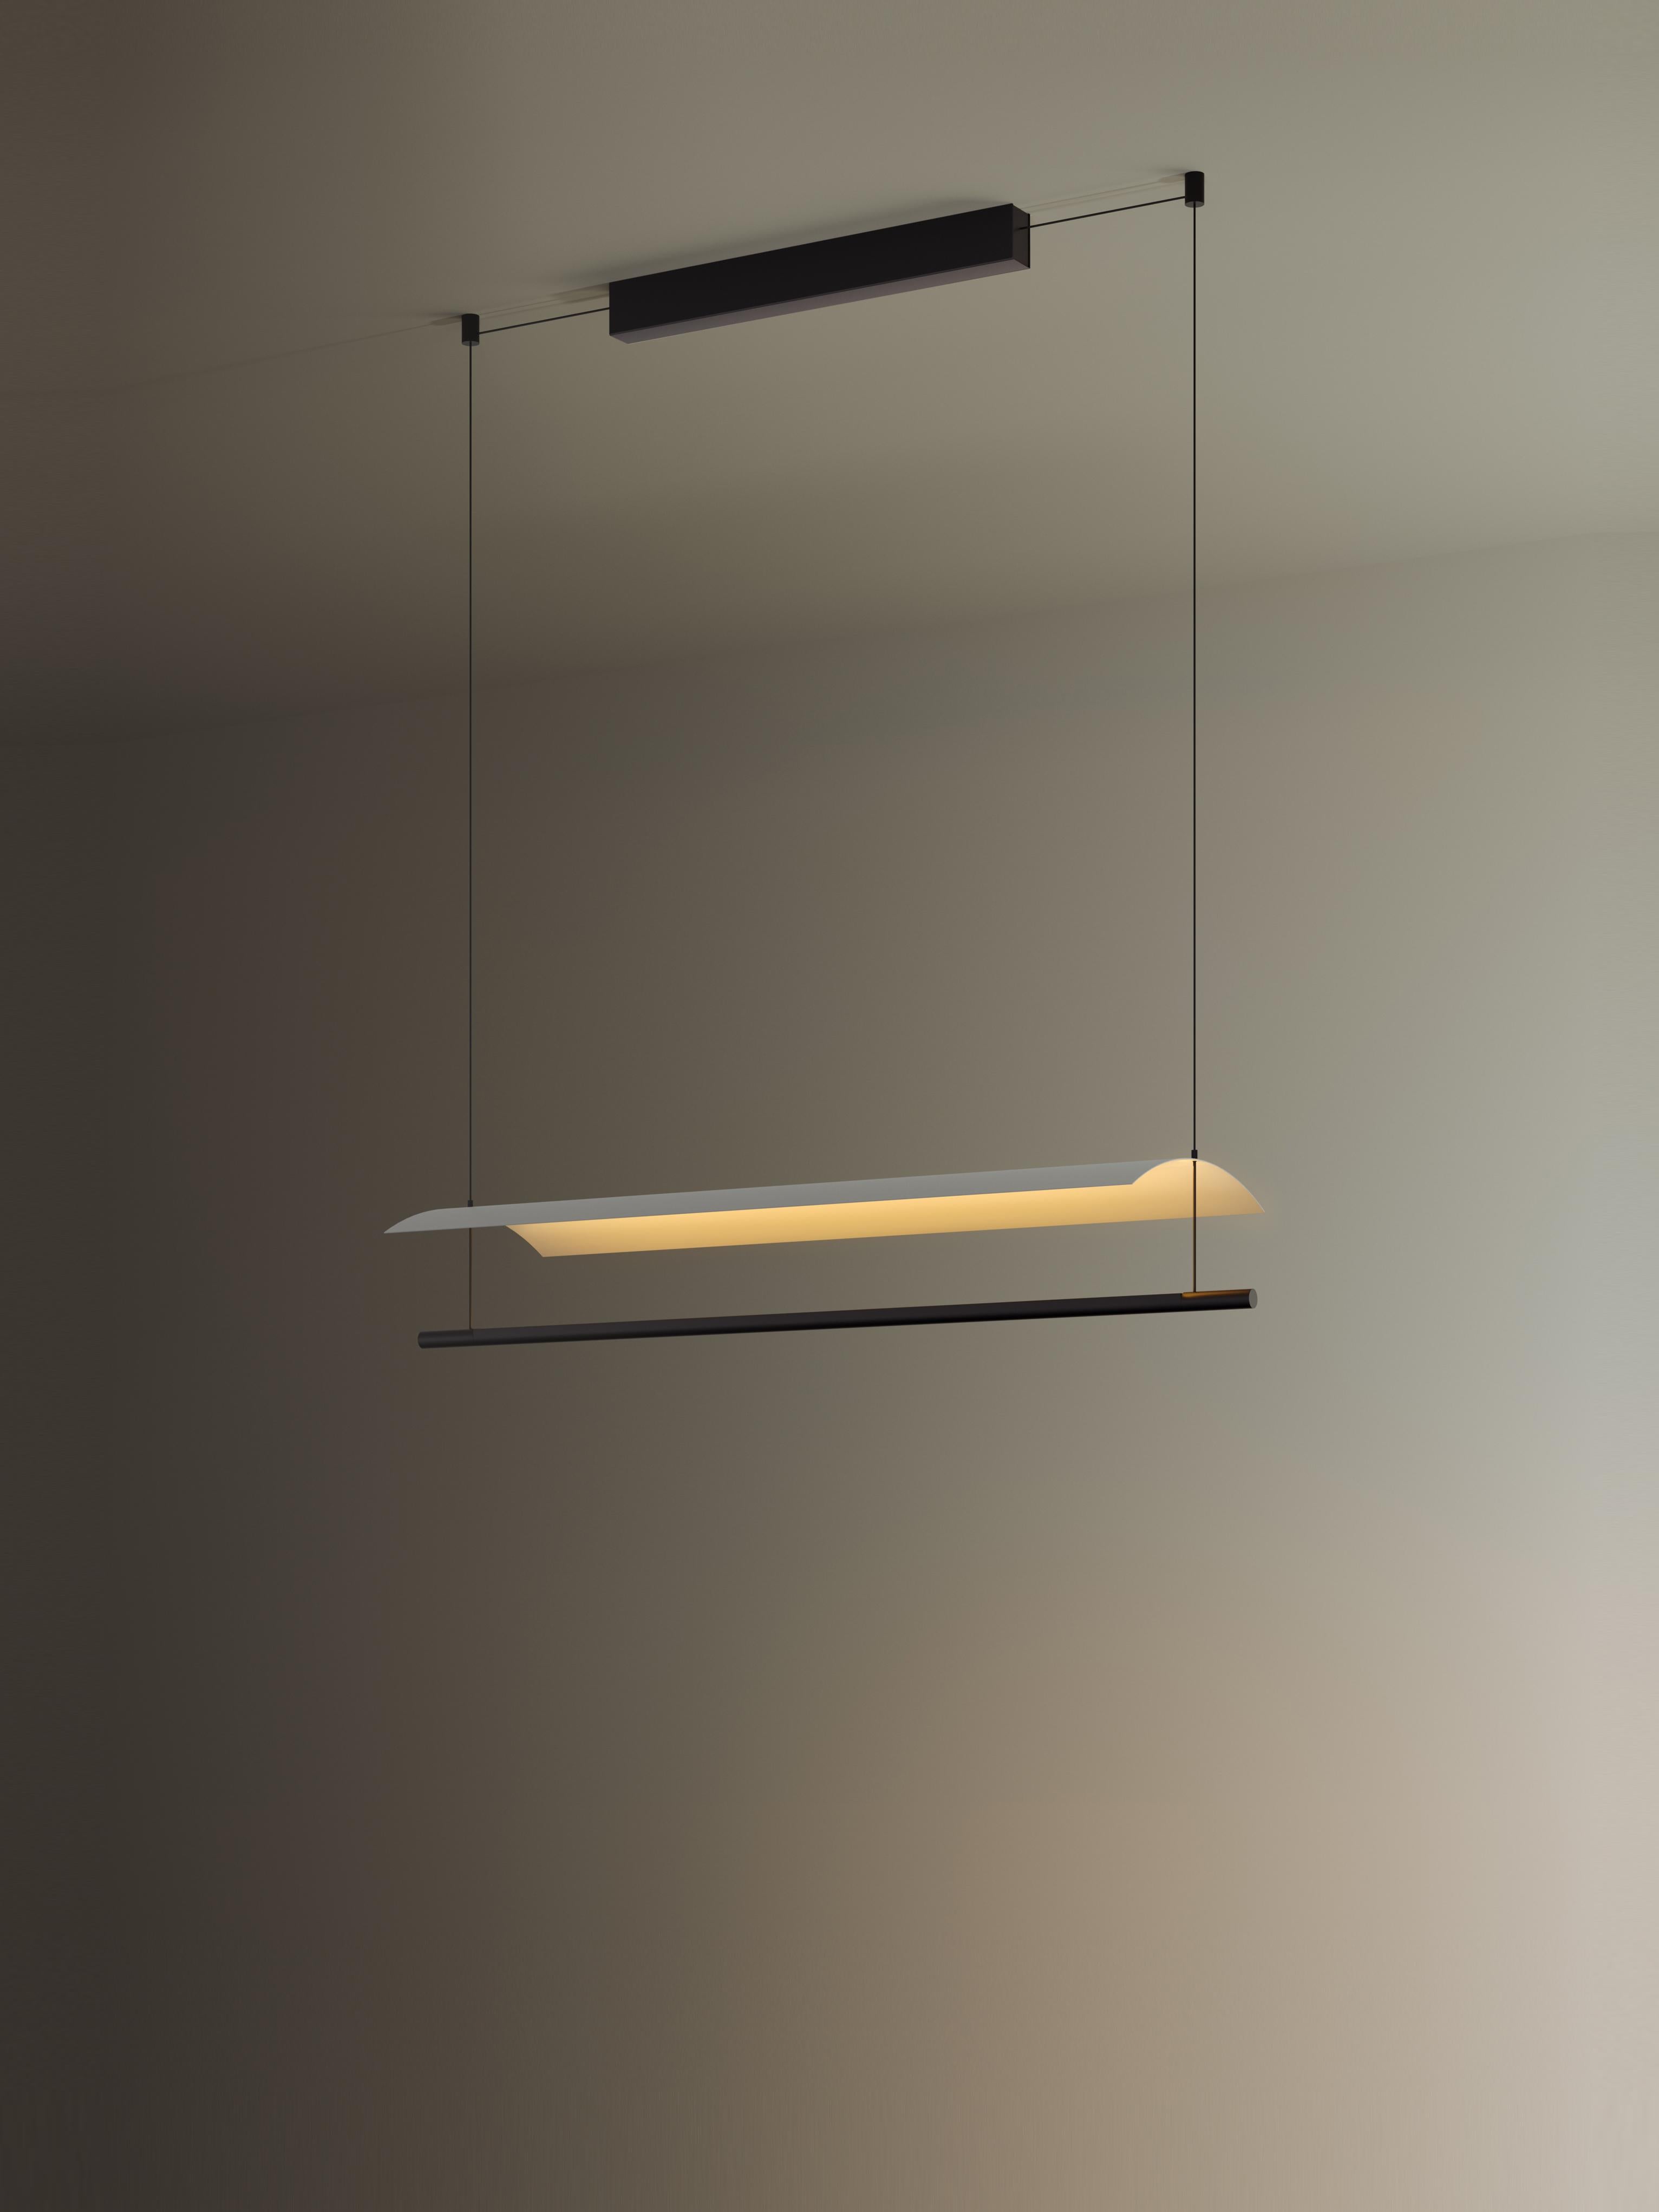 Lámina 85 pendant lamp by Antoni Arola
Dimensions: D 98.7 x W 30 x H 12.6 cm
Materials: Metal, plastic.
Available in other sizes.

A line of light and a thin metal sheet create a soft but effective levity. A marriage of the poetic and the